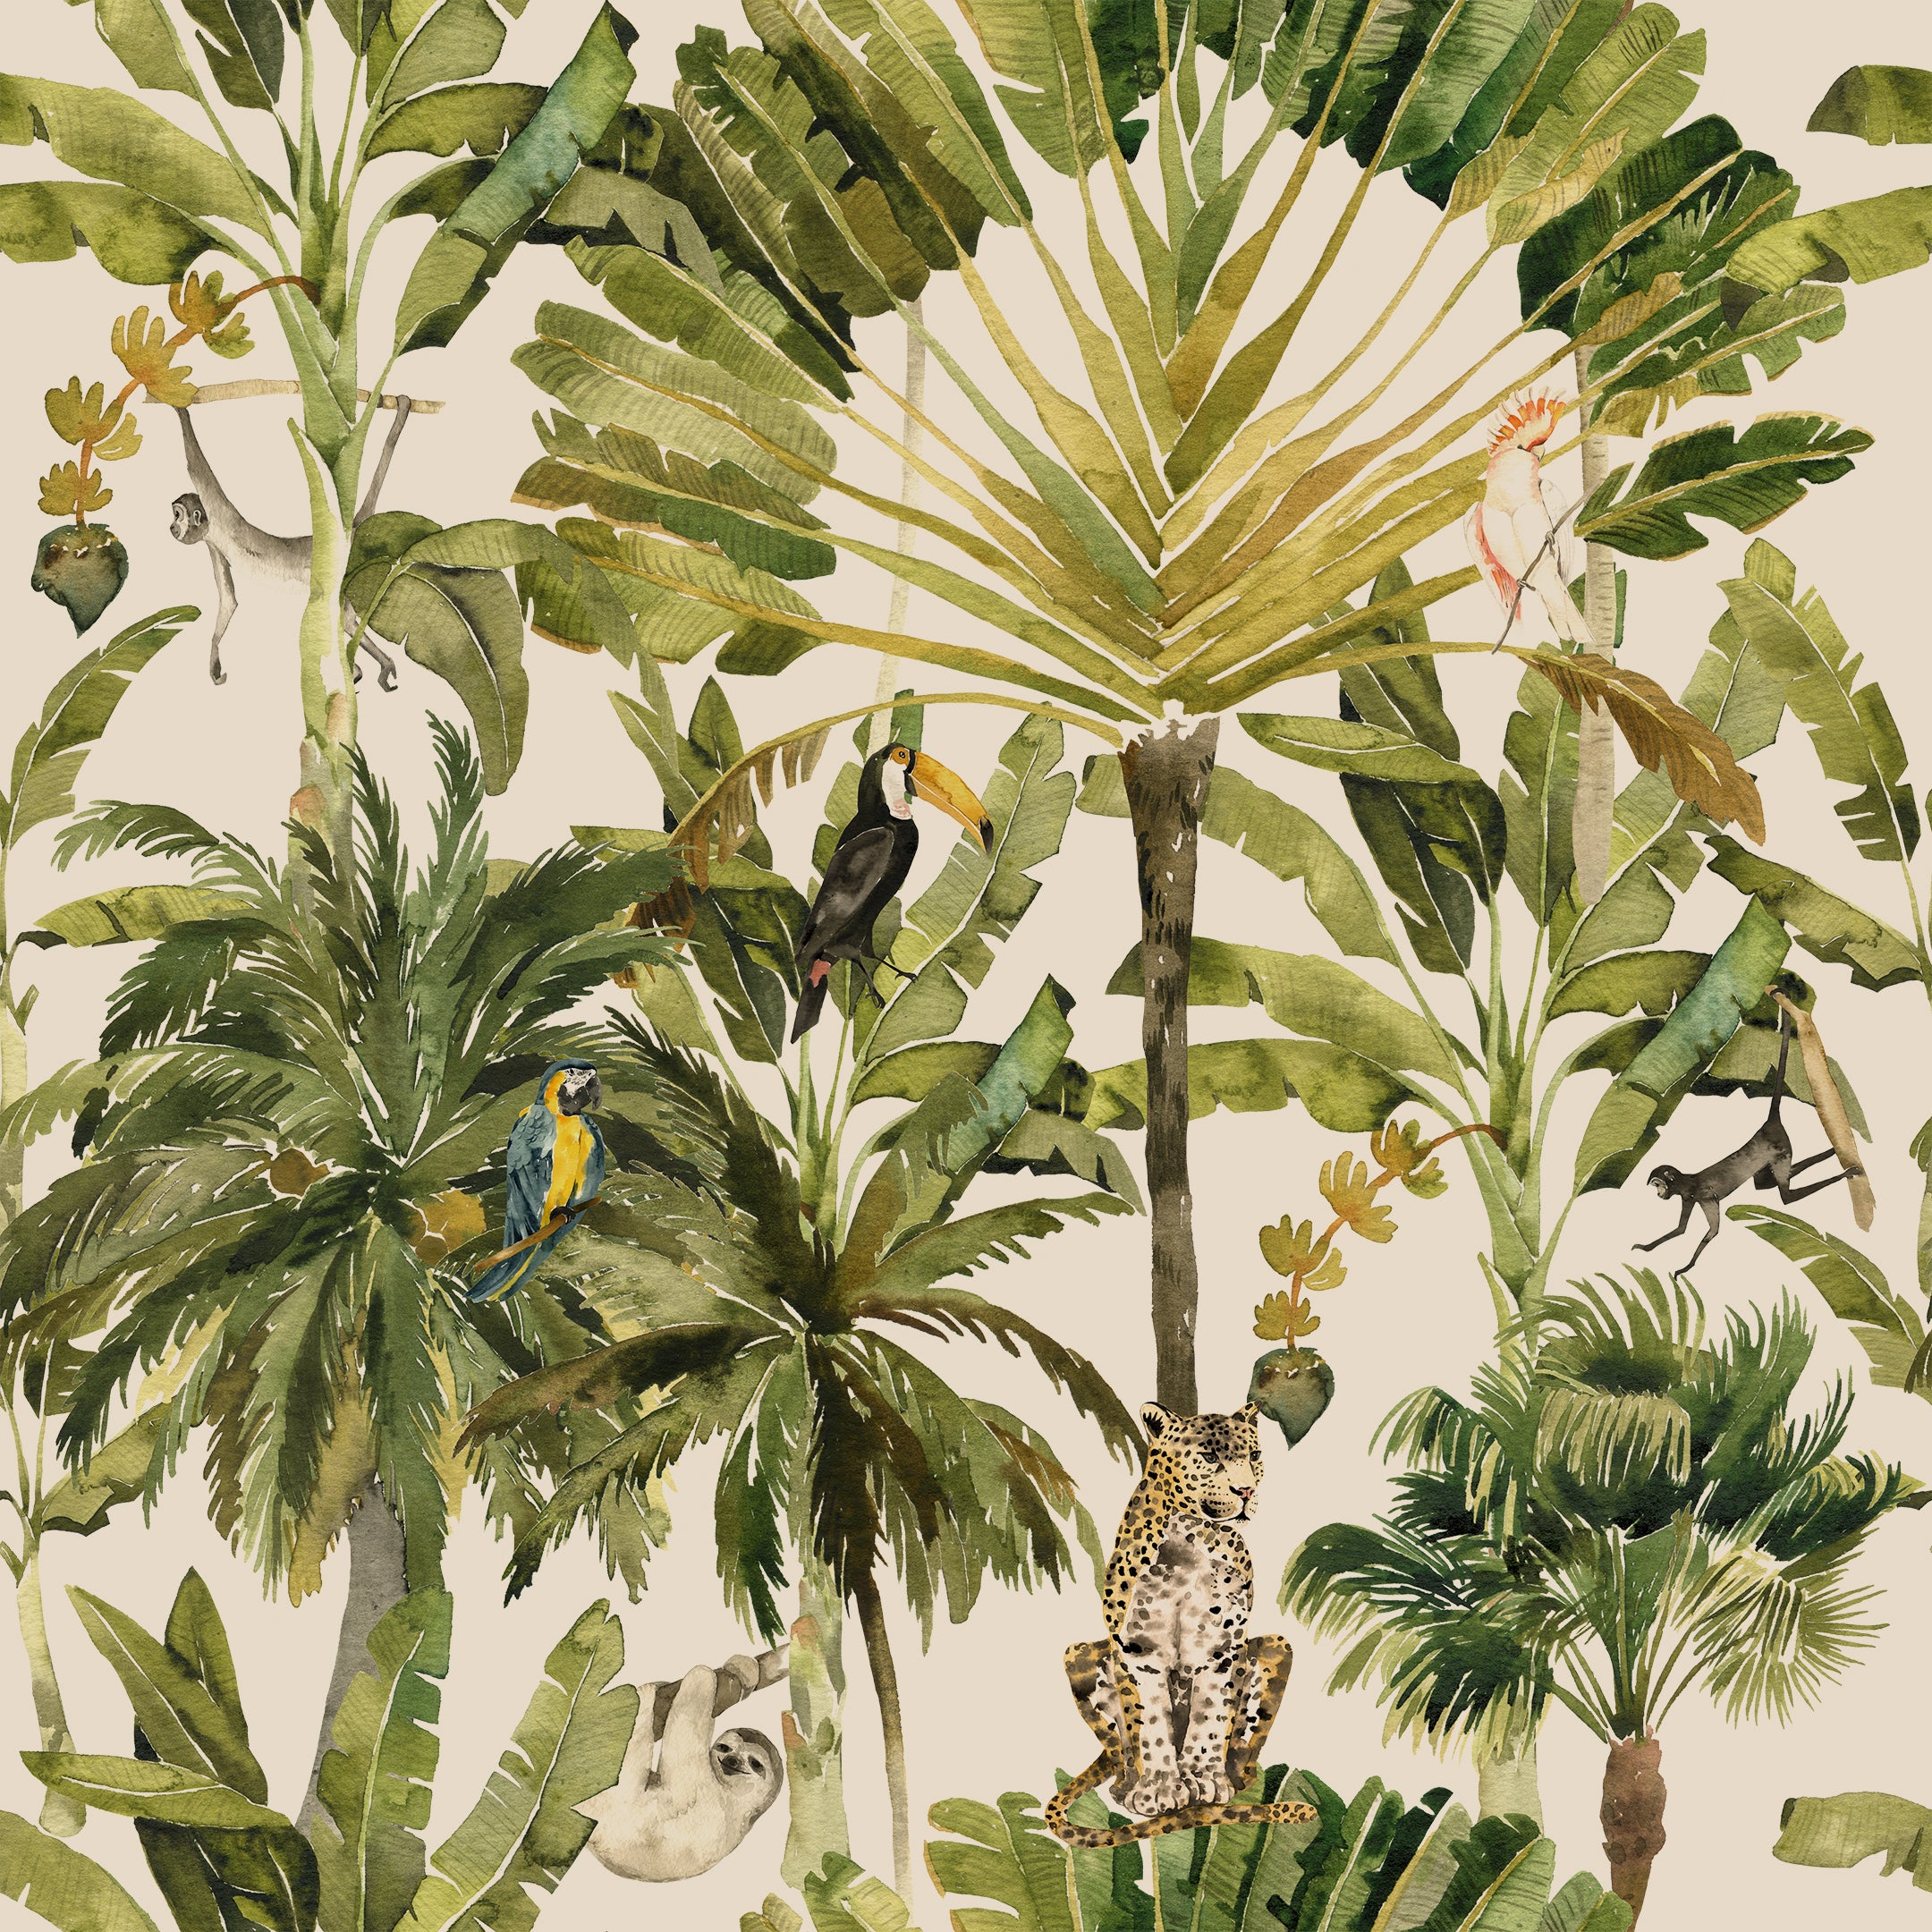 A vibrant, watercolor-style wallpaper featuring a lush tropical scene with various palm tree species and large fan-like leaves. Various animals, including a cheetah, parrots, and a toucan, are intricately depicted among the foliage. The color palette includes shades of green, gold, and accents of blues and oranges, enhancing the exotic feel.